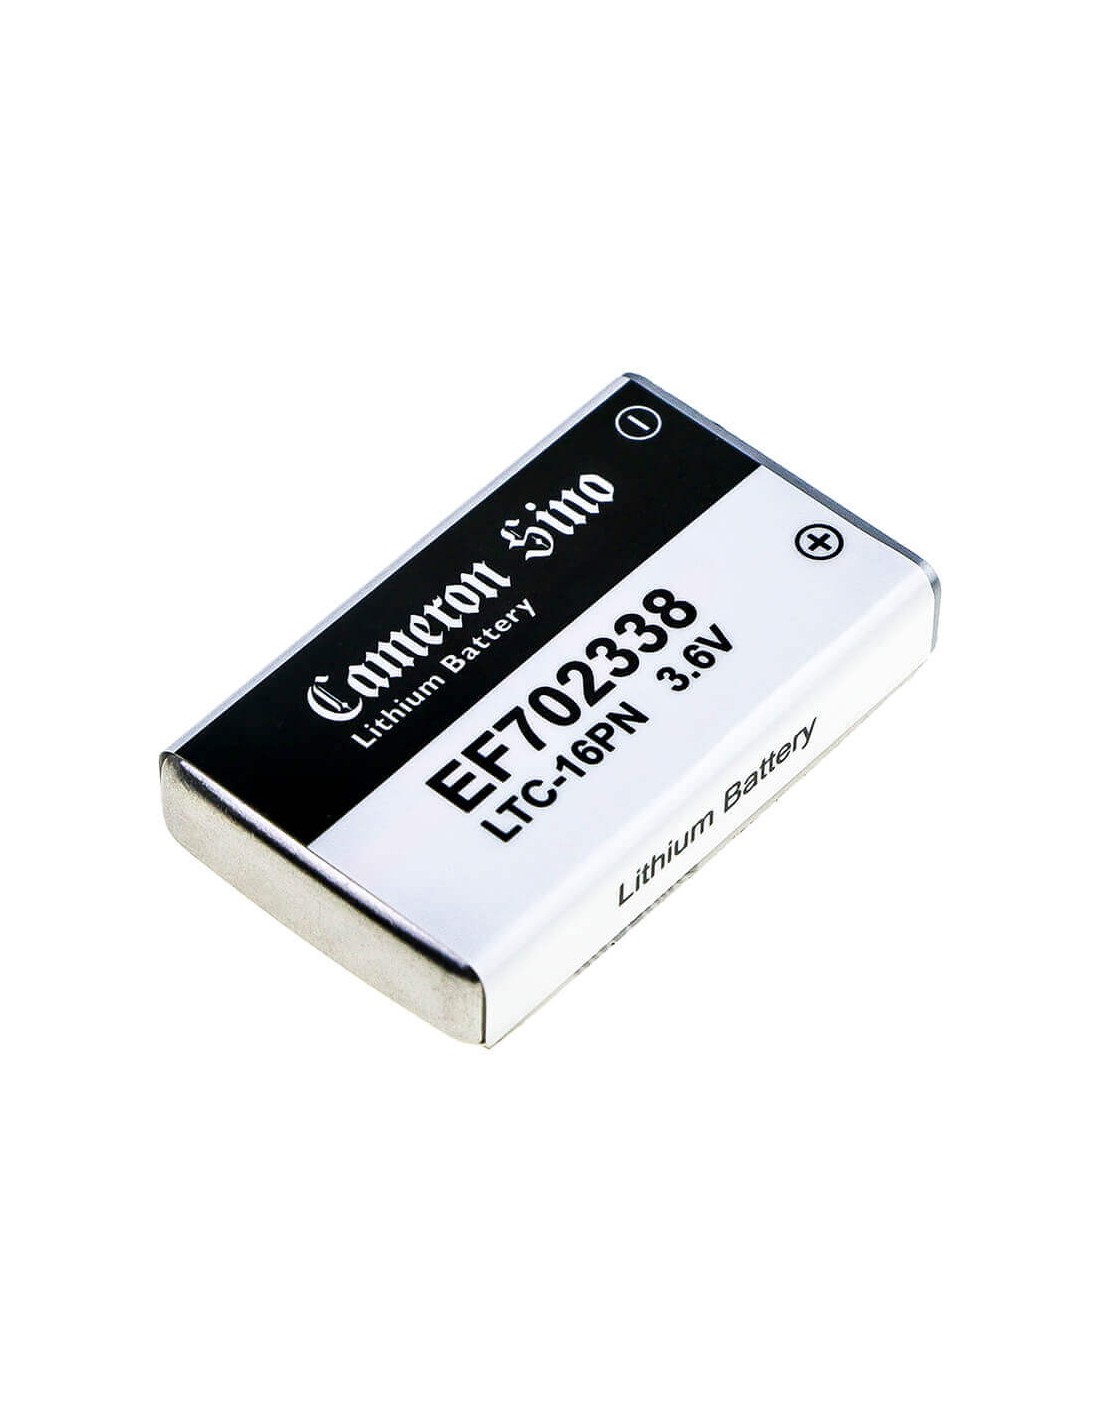 Battery for Cameron Sino Ef702338 Primary Lithium Cell Battery, Li-socl2 Ef702338 Cs-ef702338, Voltage: 3.6v Nominal Capacity: 1